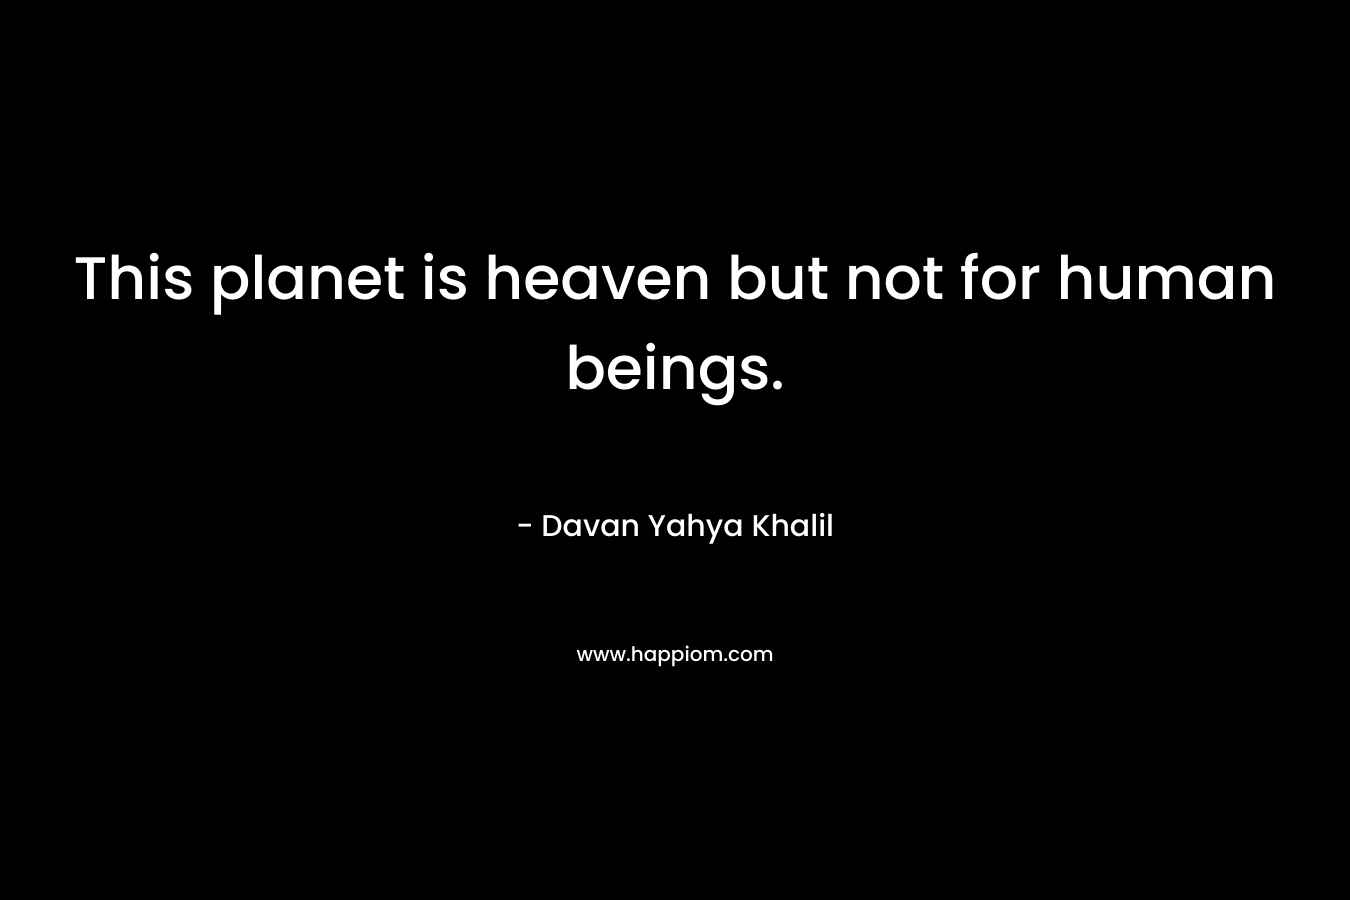 This planet is heaven but not for human beings. – Davan Yahya Khalil